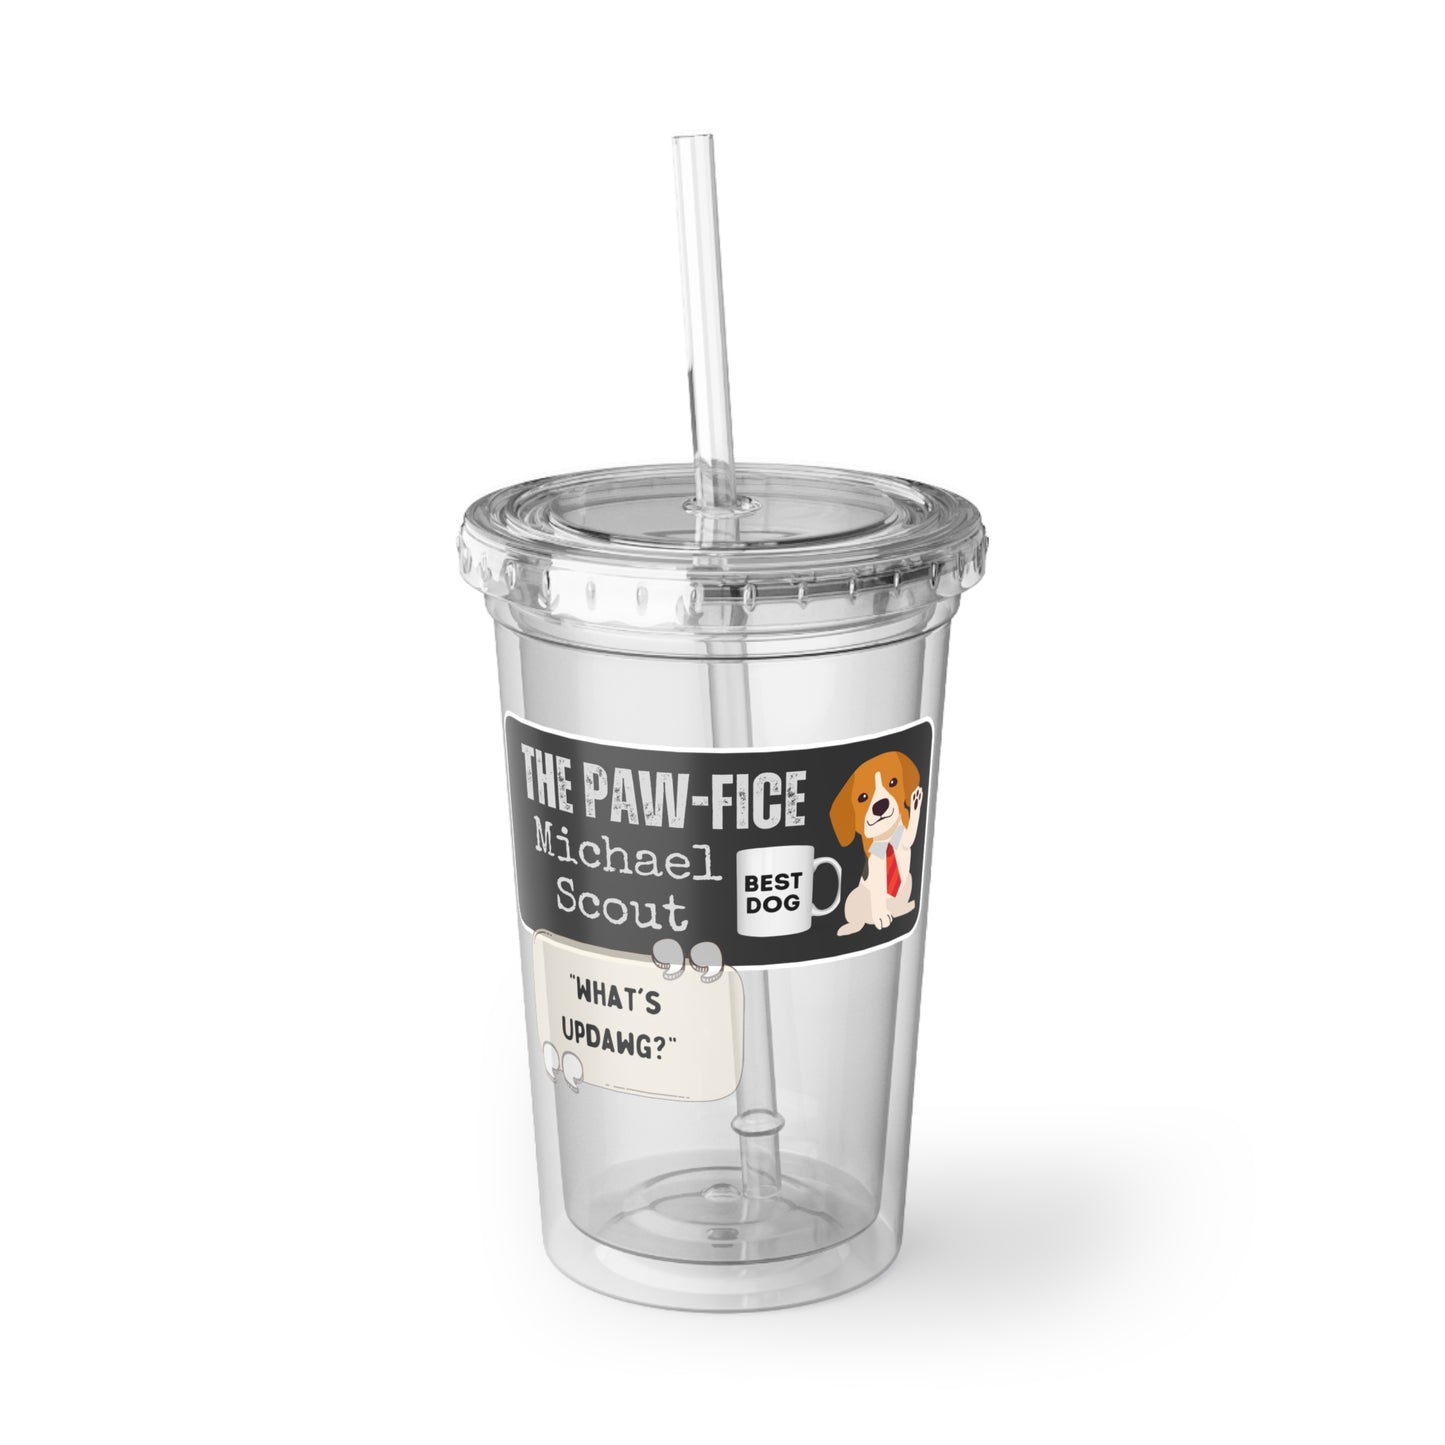 The Office fan *dog edition acrylic cup/ The Office Michael Scott quote